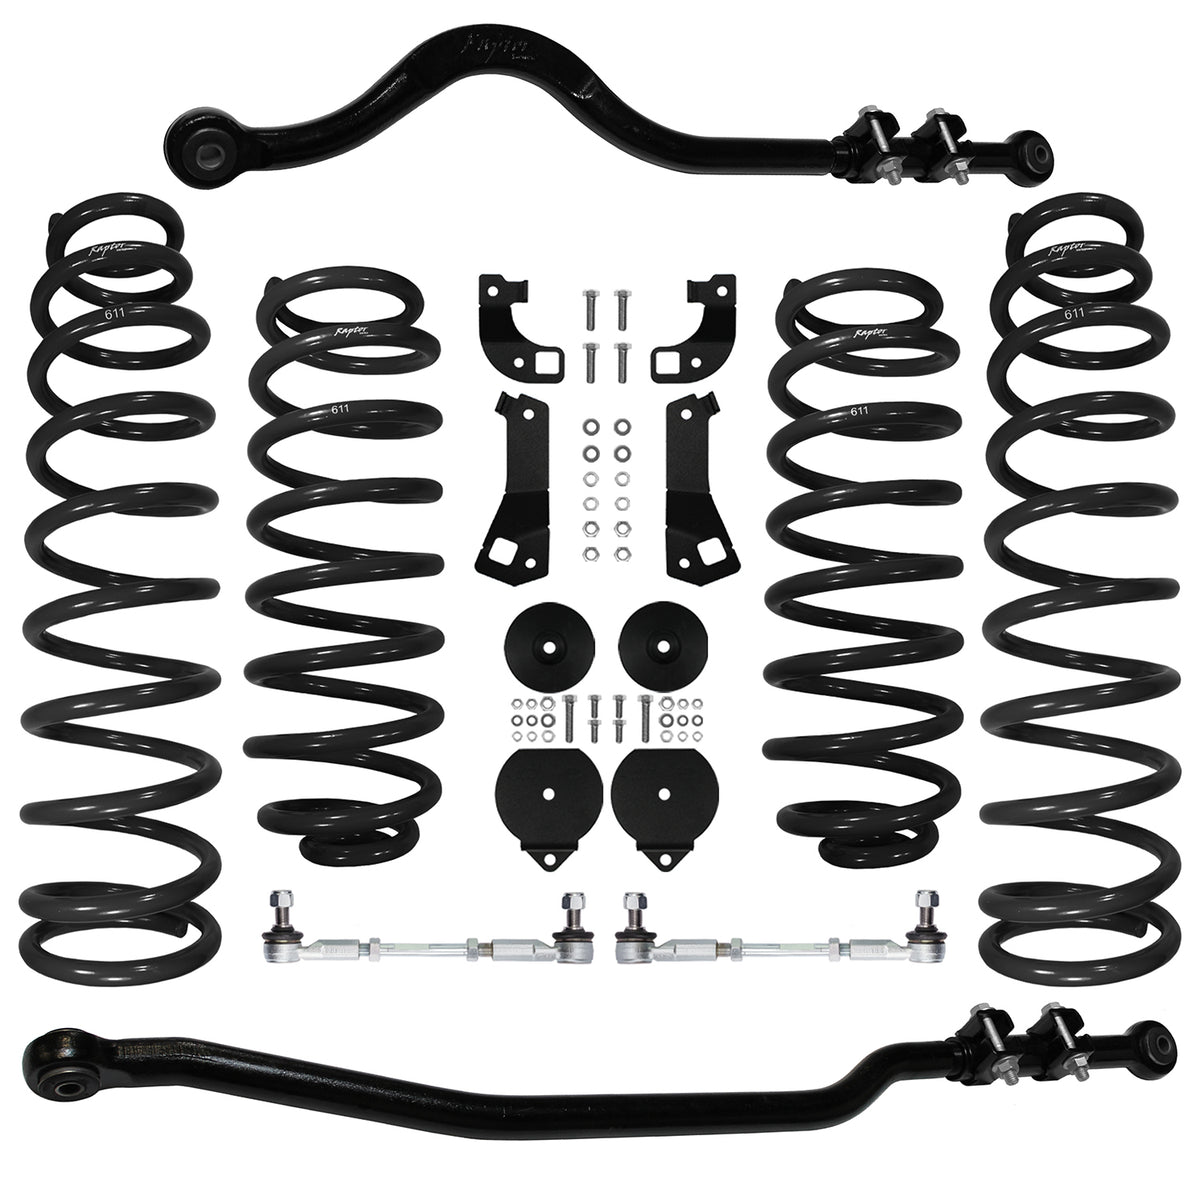 RSO Suspension - KJK2511 - 2.5 Inch Stage 1.1 Lift Kit - 07-18 Jeep Wrangler JK/JKU Lift Height: 2.5in Position: Front And Rear